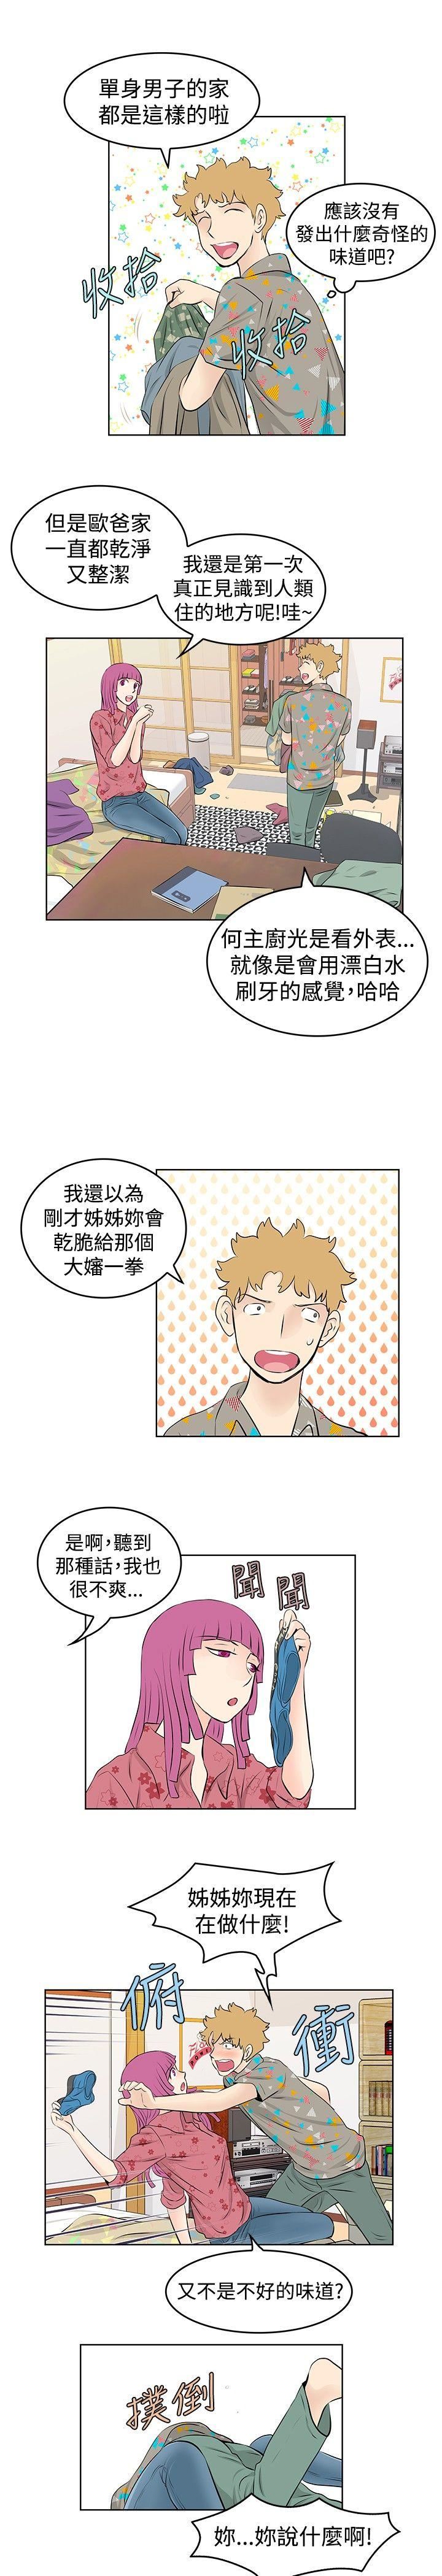 《TouchTouch》漫画 第37话